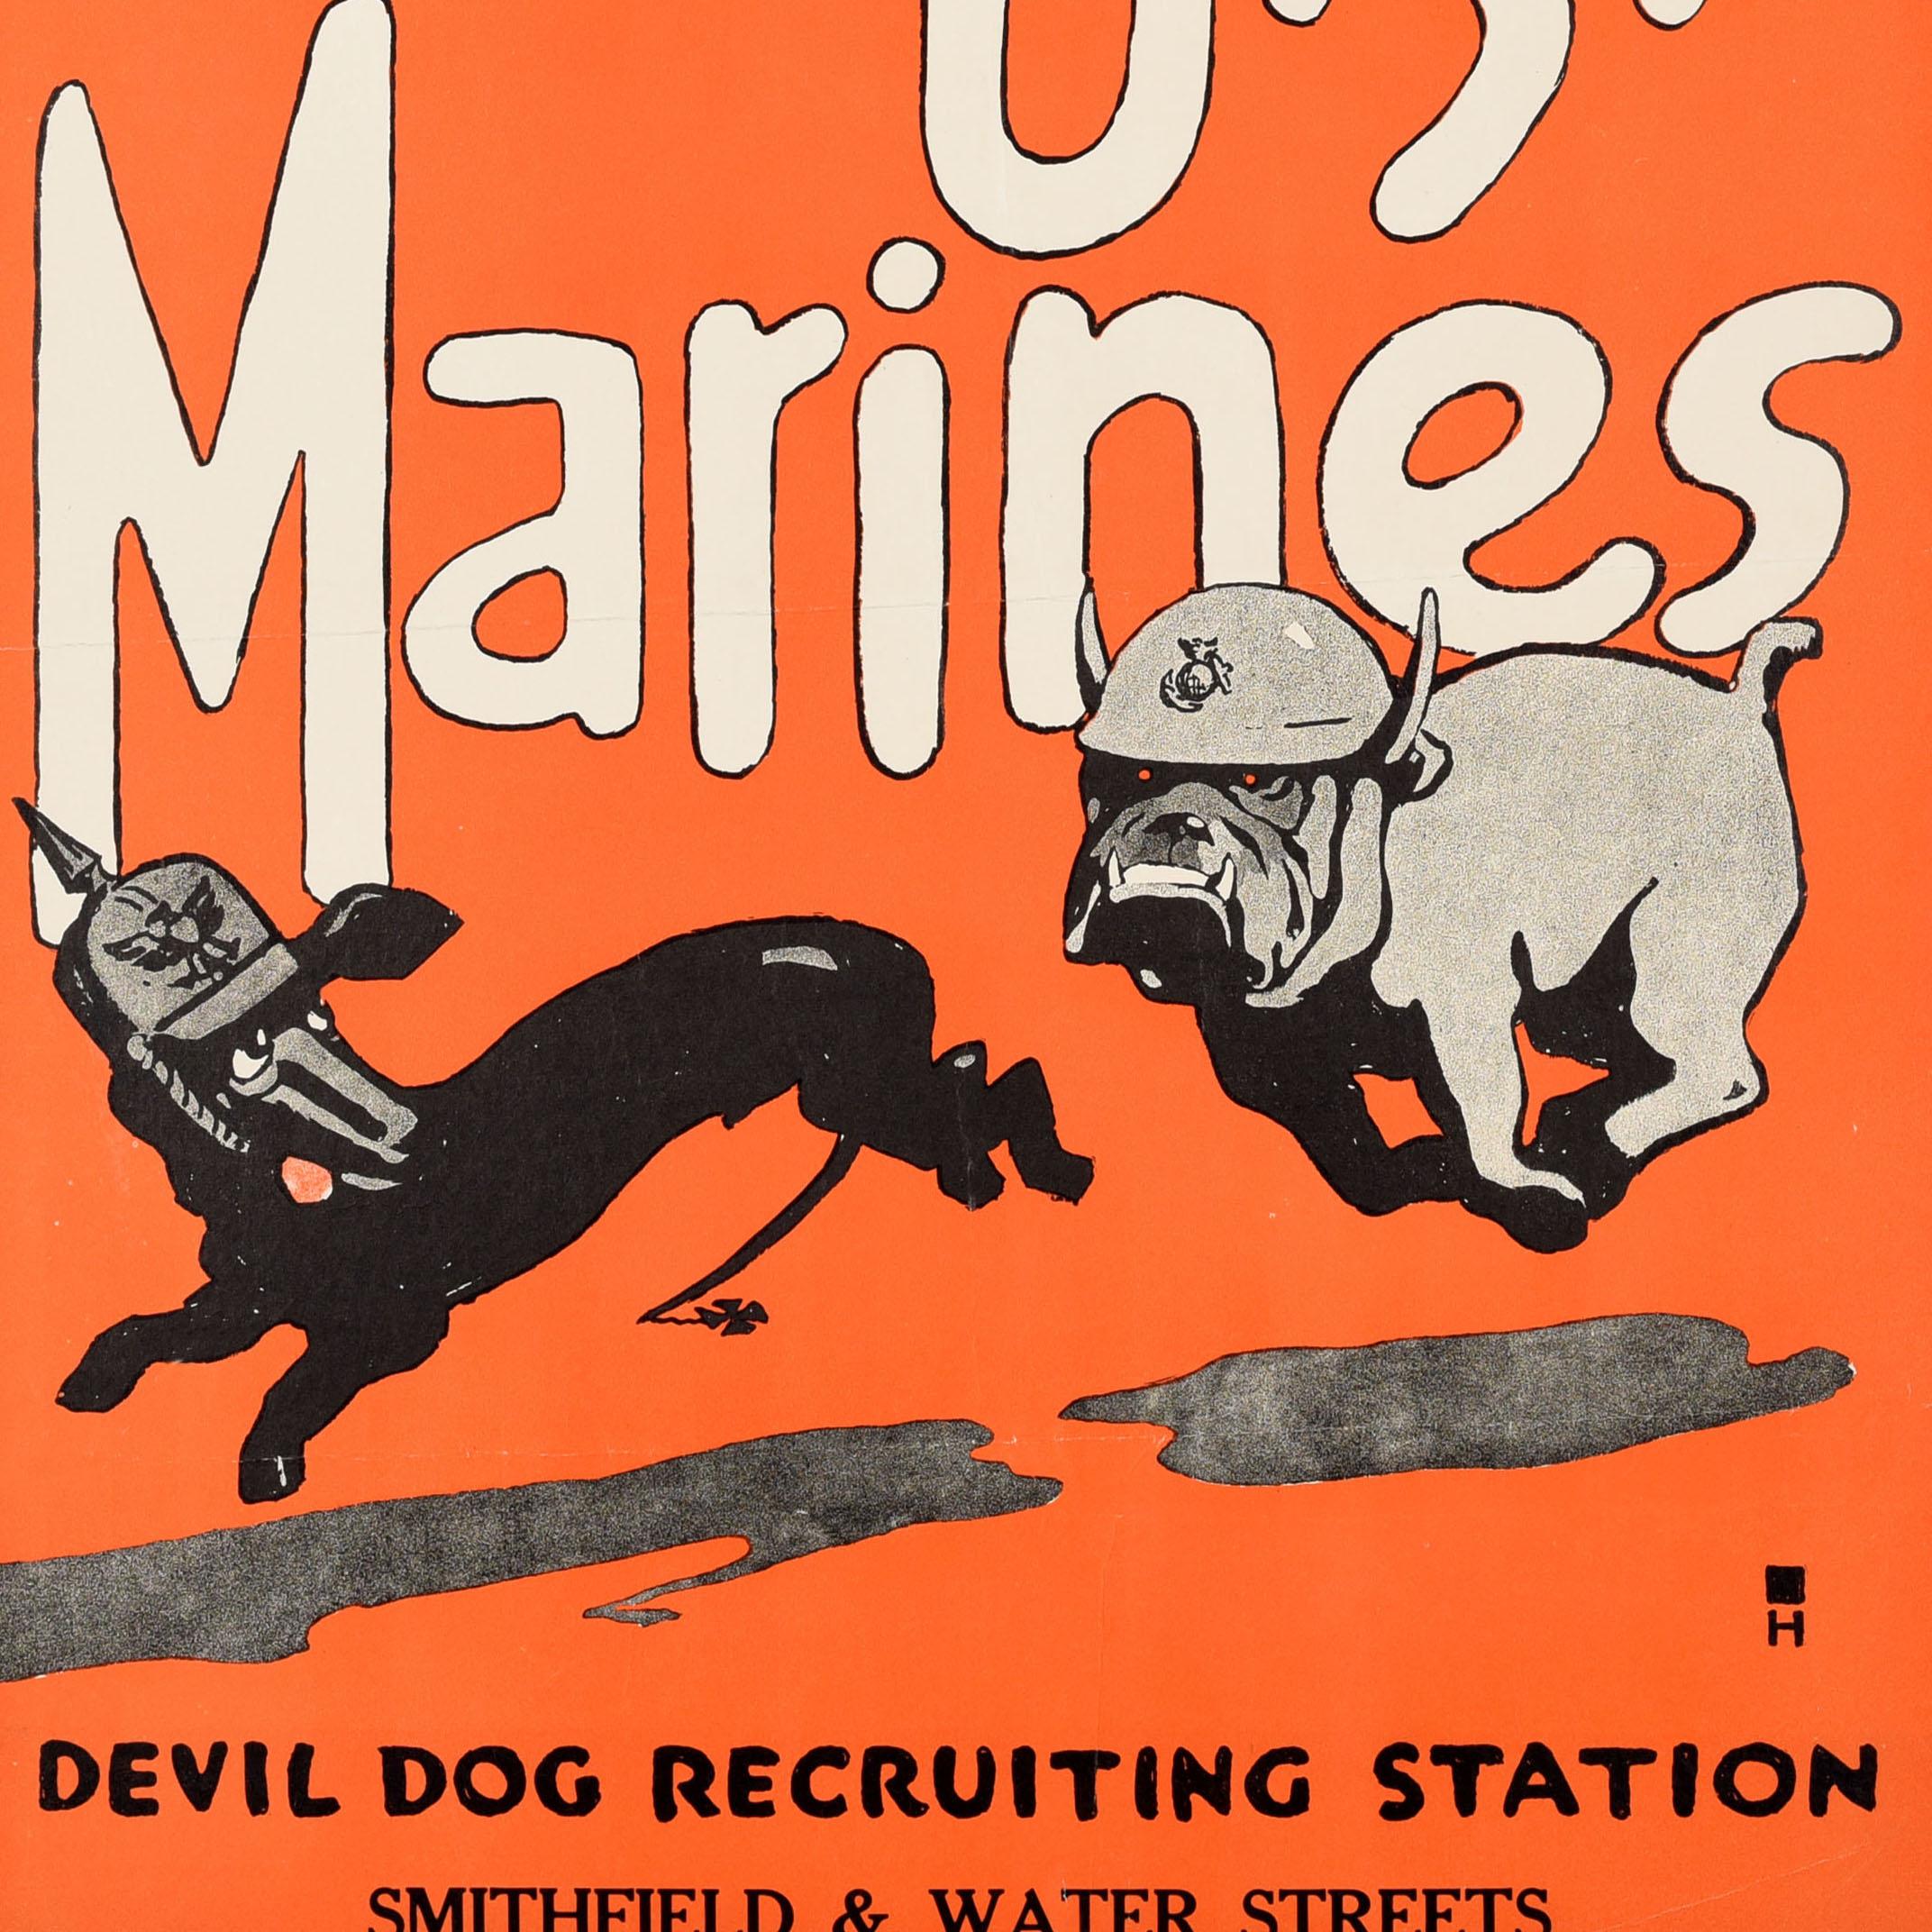 Original antique World War One recruitment poster for the US Marine Corps (founded 1775) - Teufel Hunden German Nickname For U.S. Marines Devil Dog Recruiting Station - featuring artwork by Charles Buckles Falls (1874-1960) depicting a bulldog